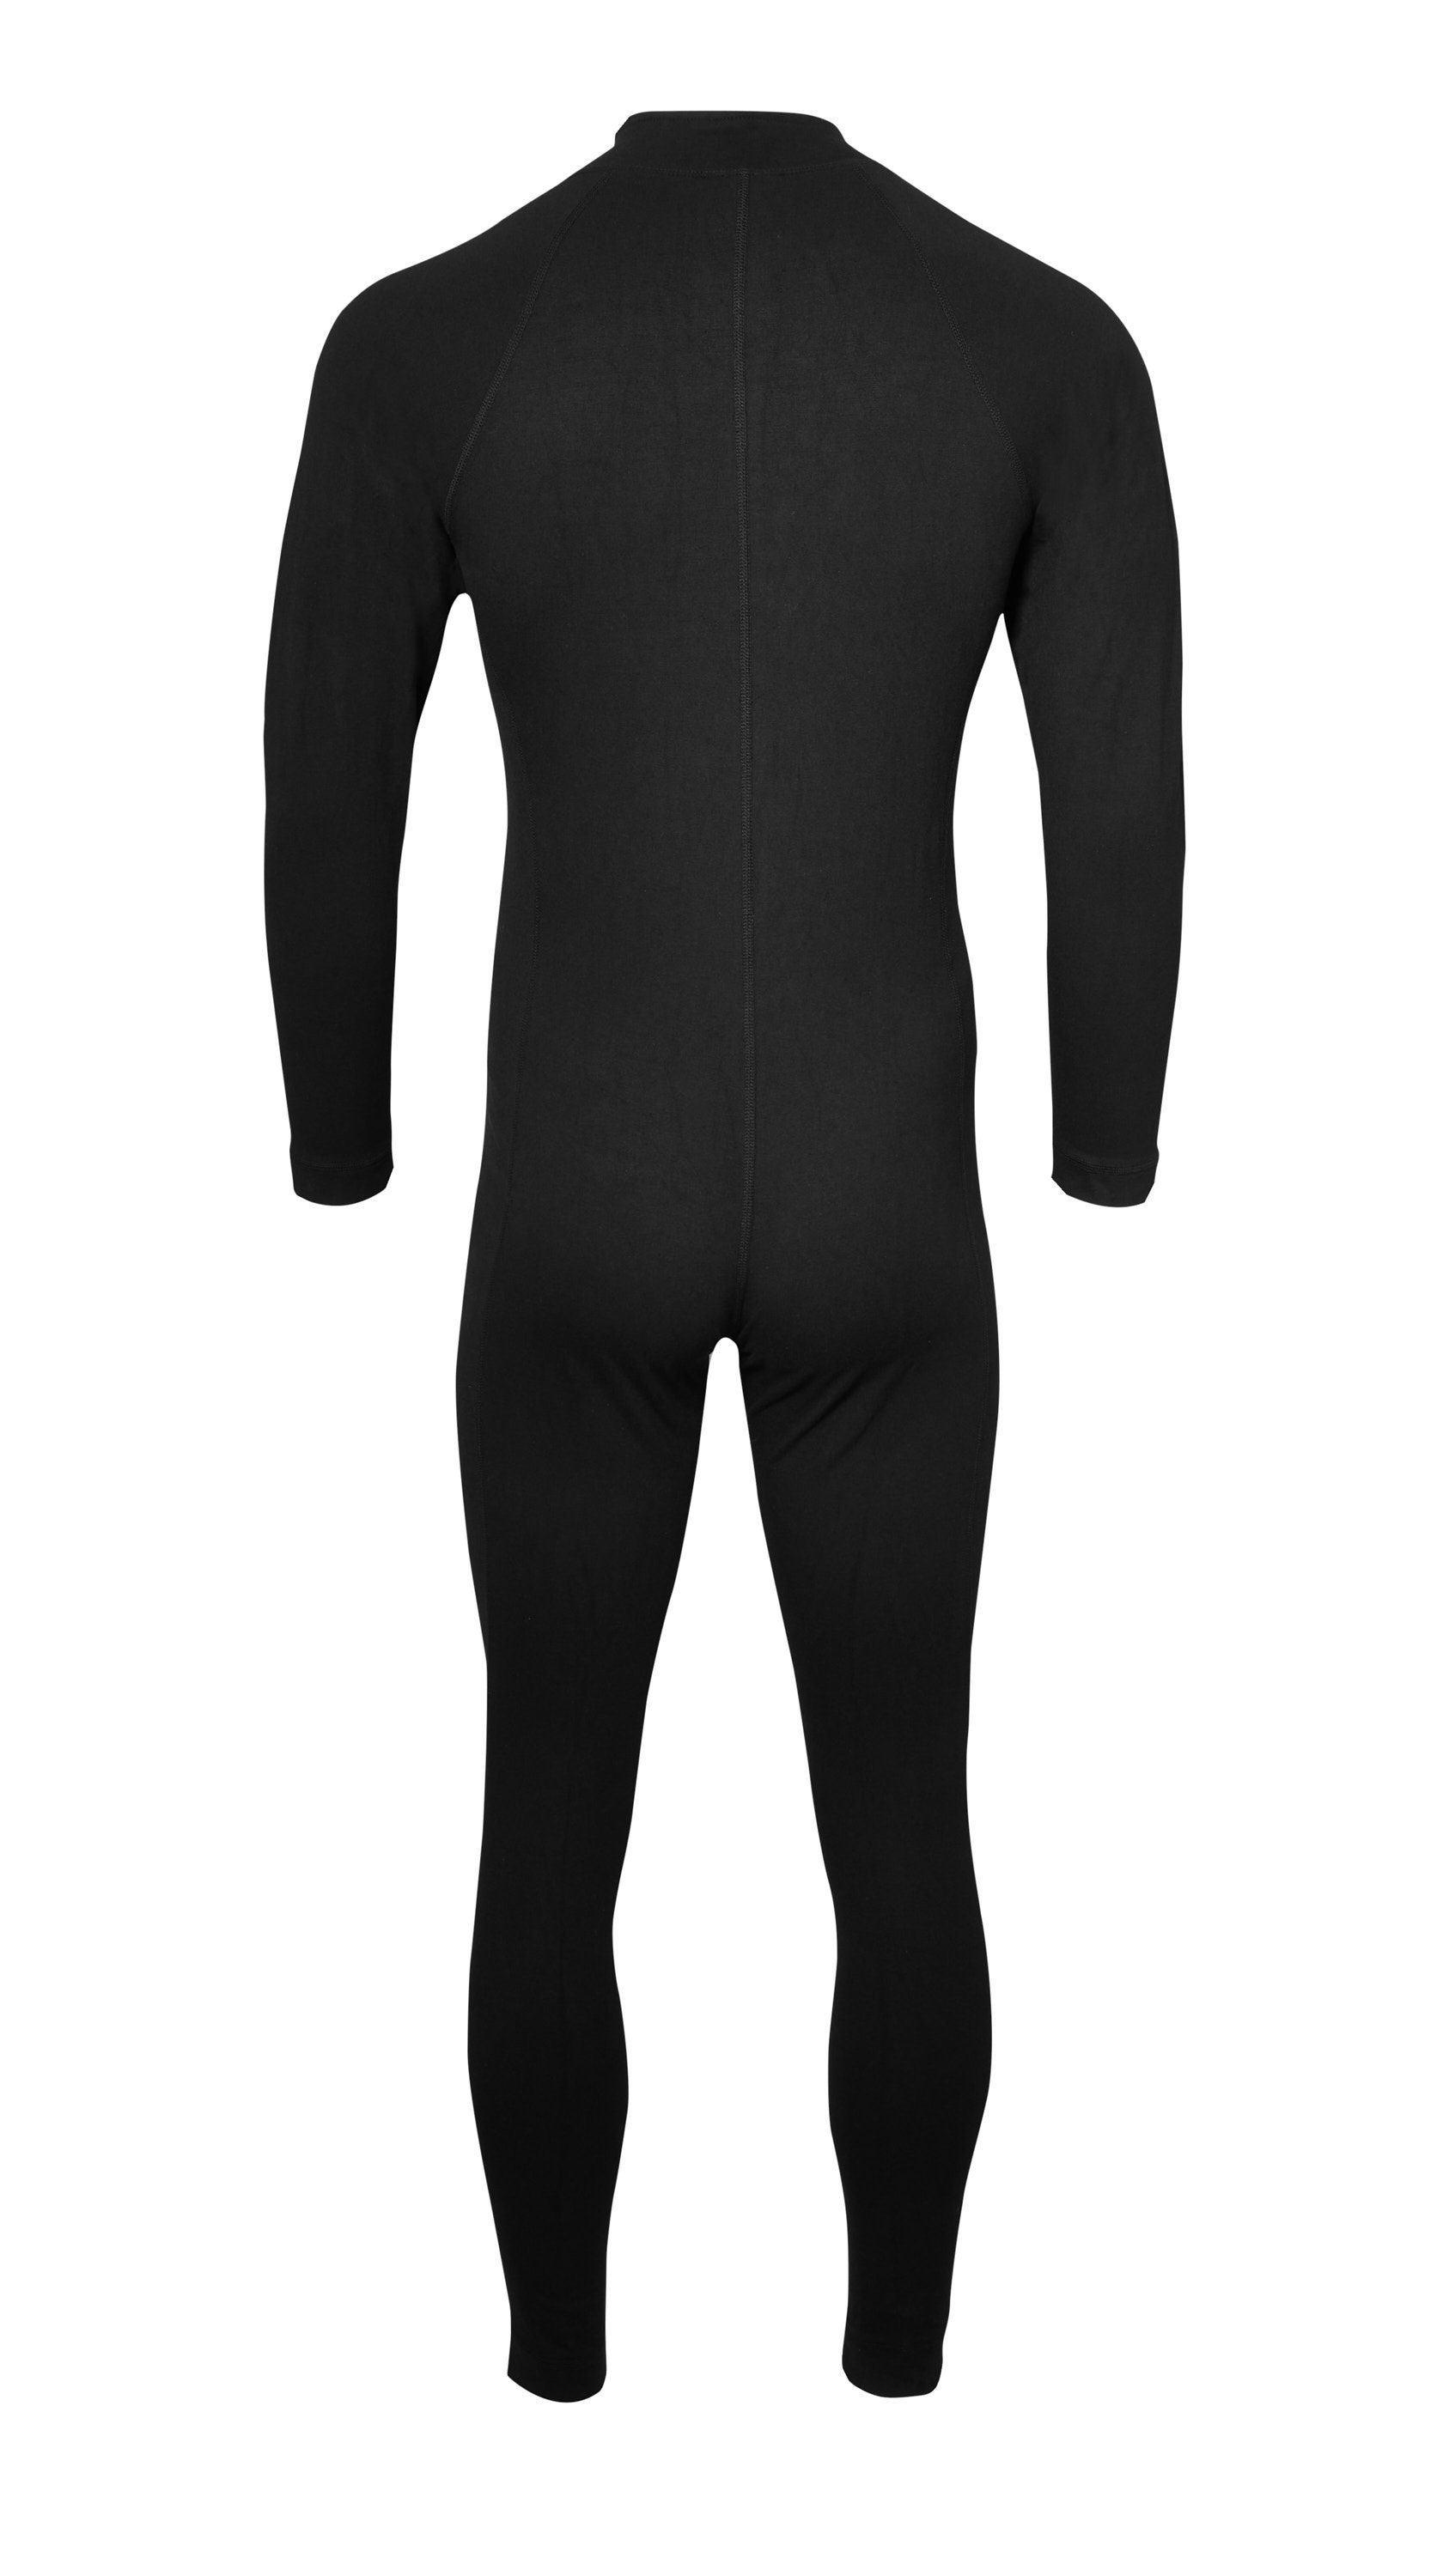 Stealth One Piece Under Suit All in One Base Layer Men's All Black ...